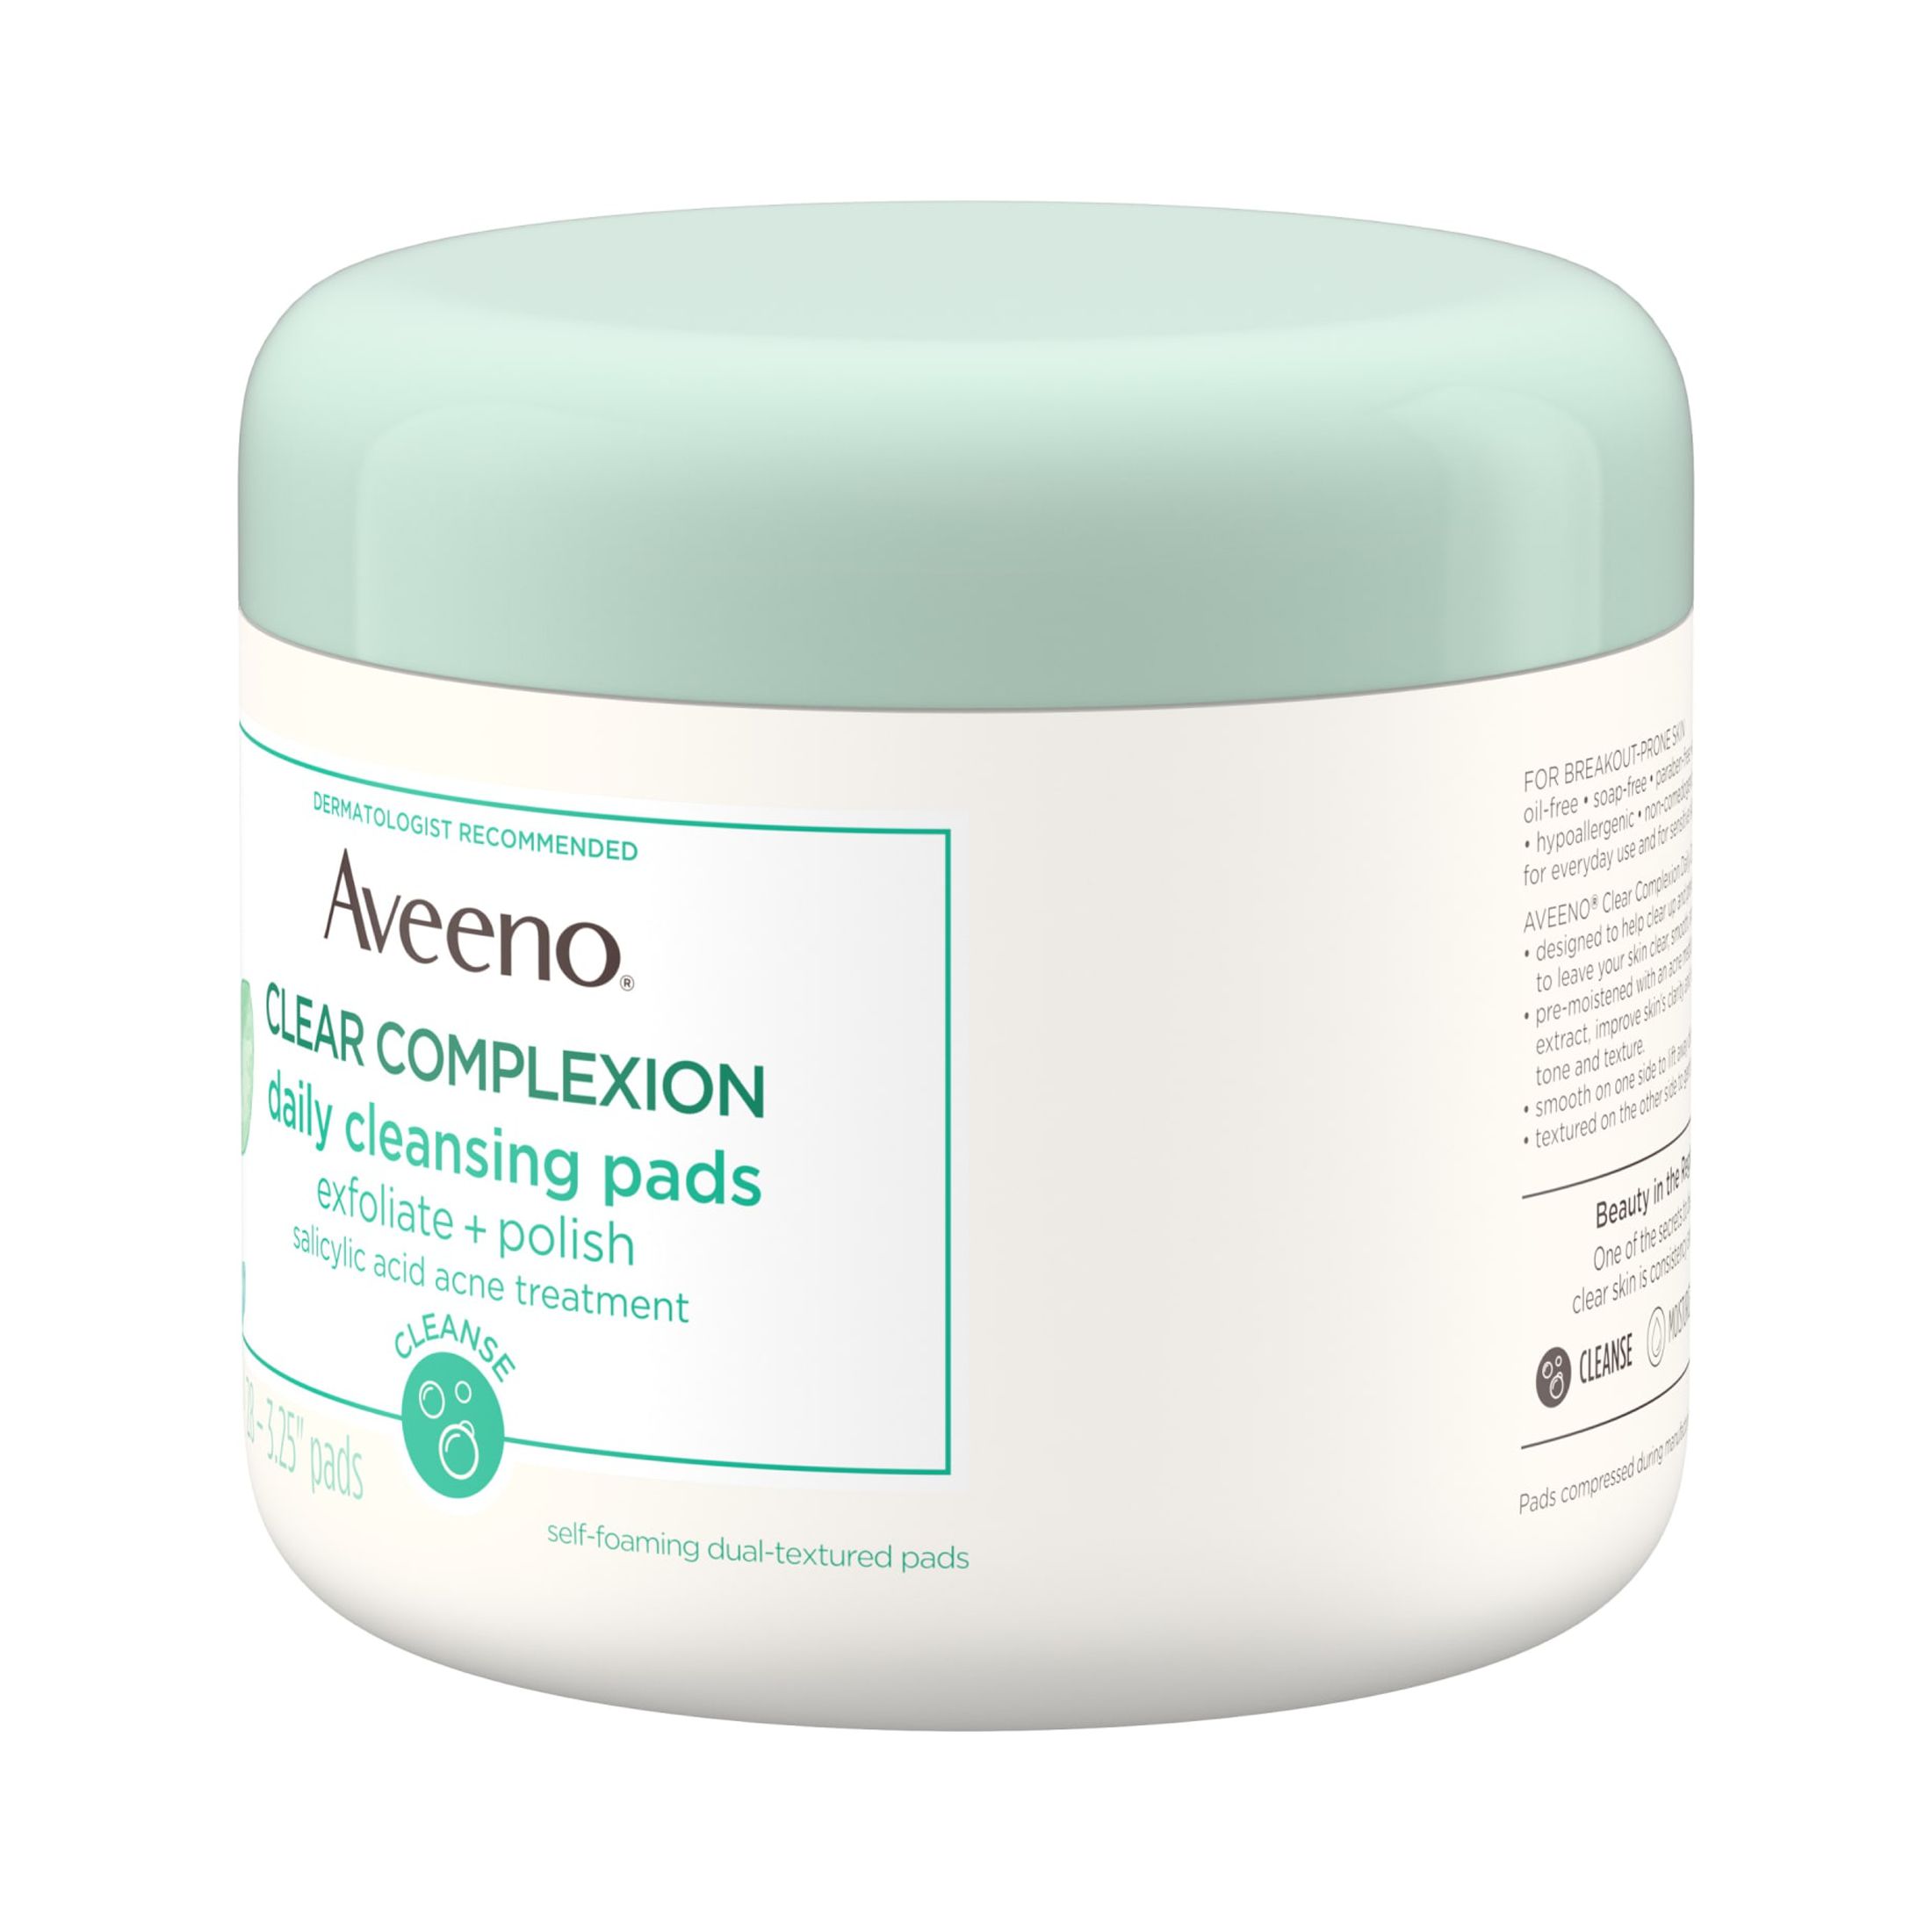 Aveeno Clear Complexion Acne Cleansing Pads, Salicylic Acid, 28 ct - image 4 of 8